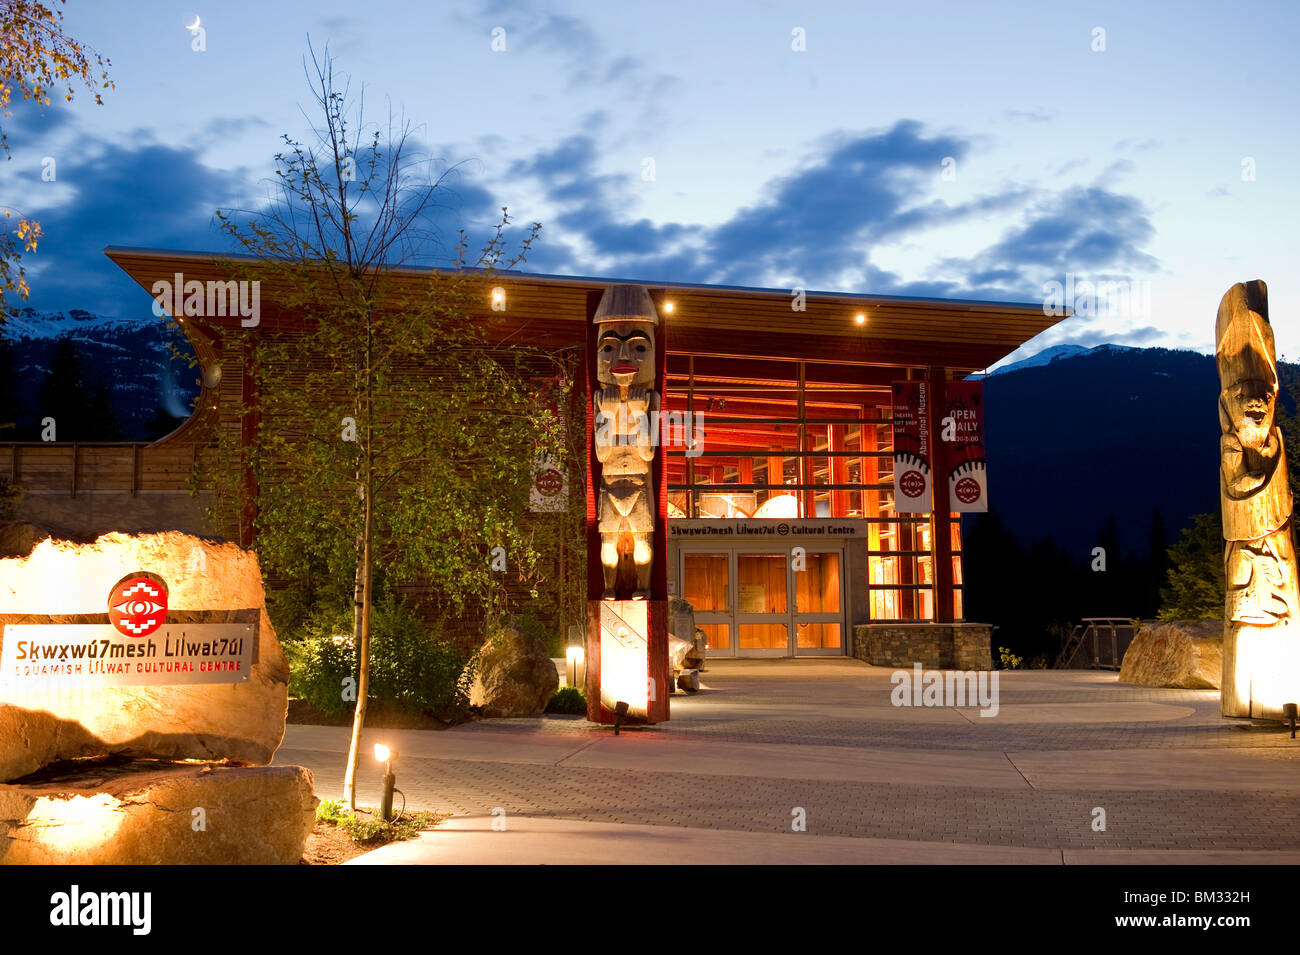 Squamish Lil'wat Cultural Centre in Whistler, British Columbia, Canada Stock Photo